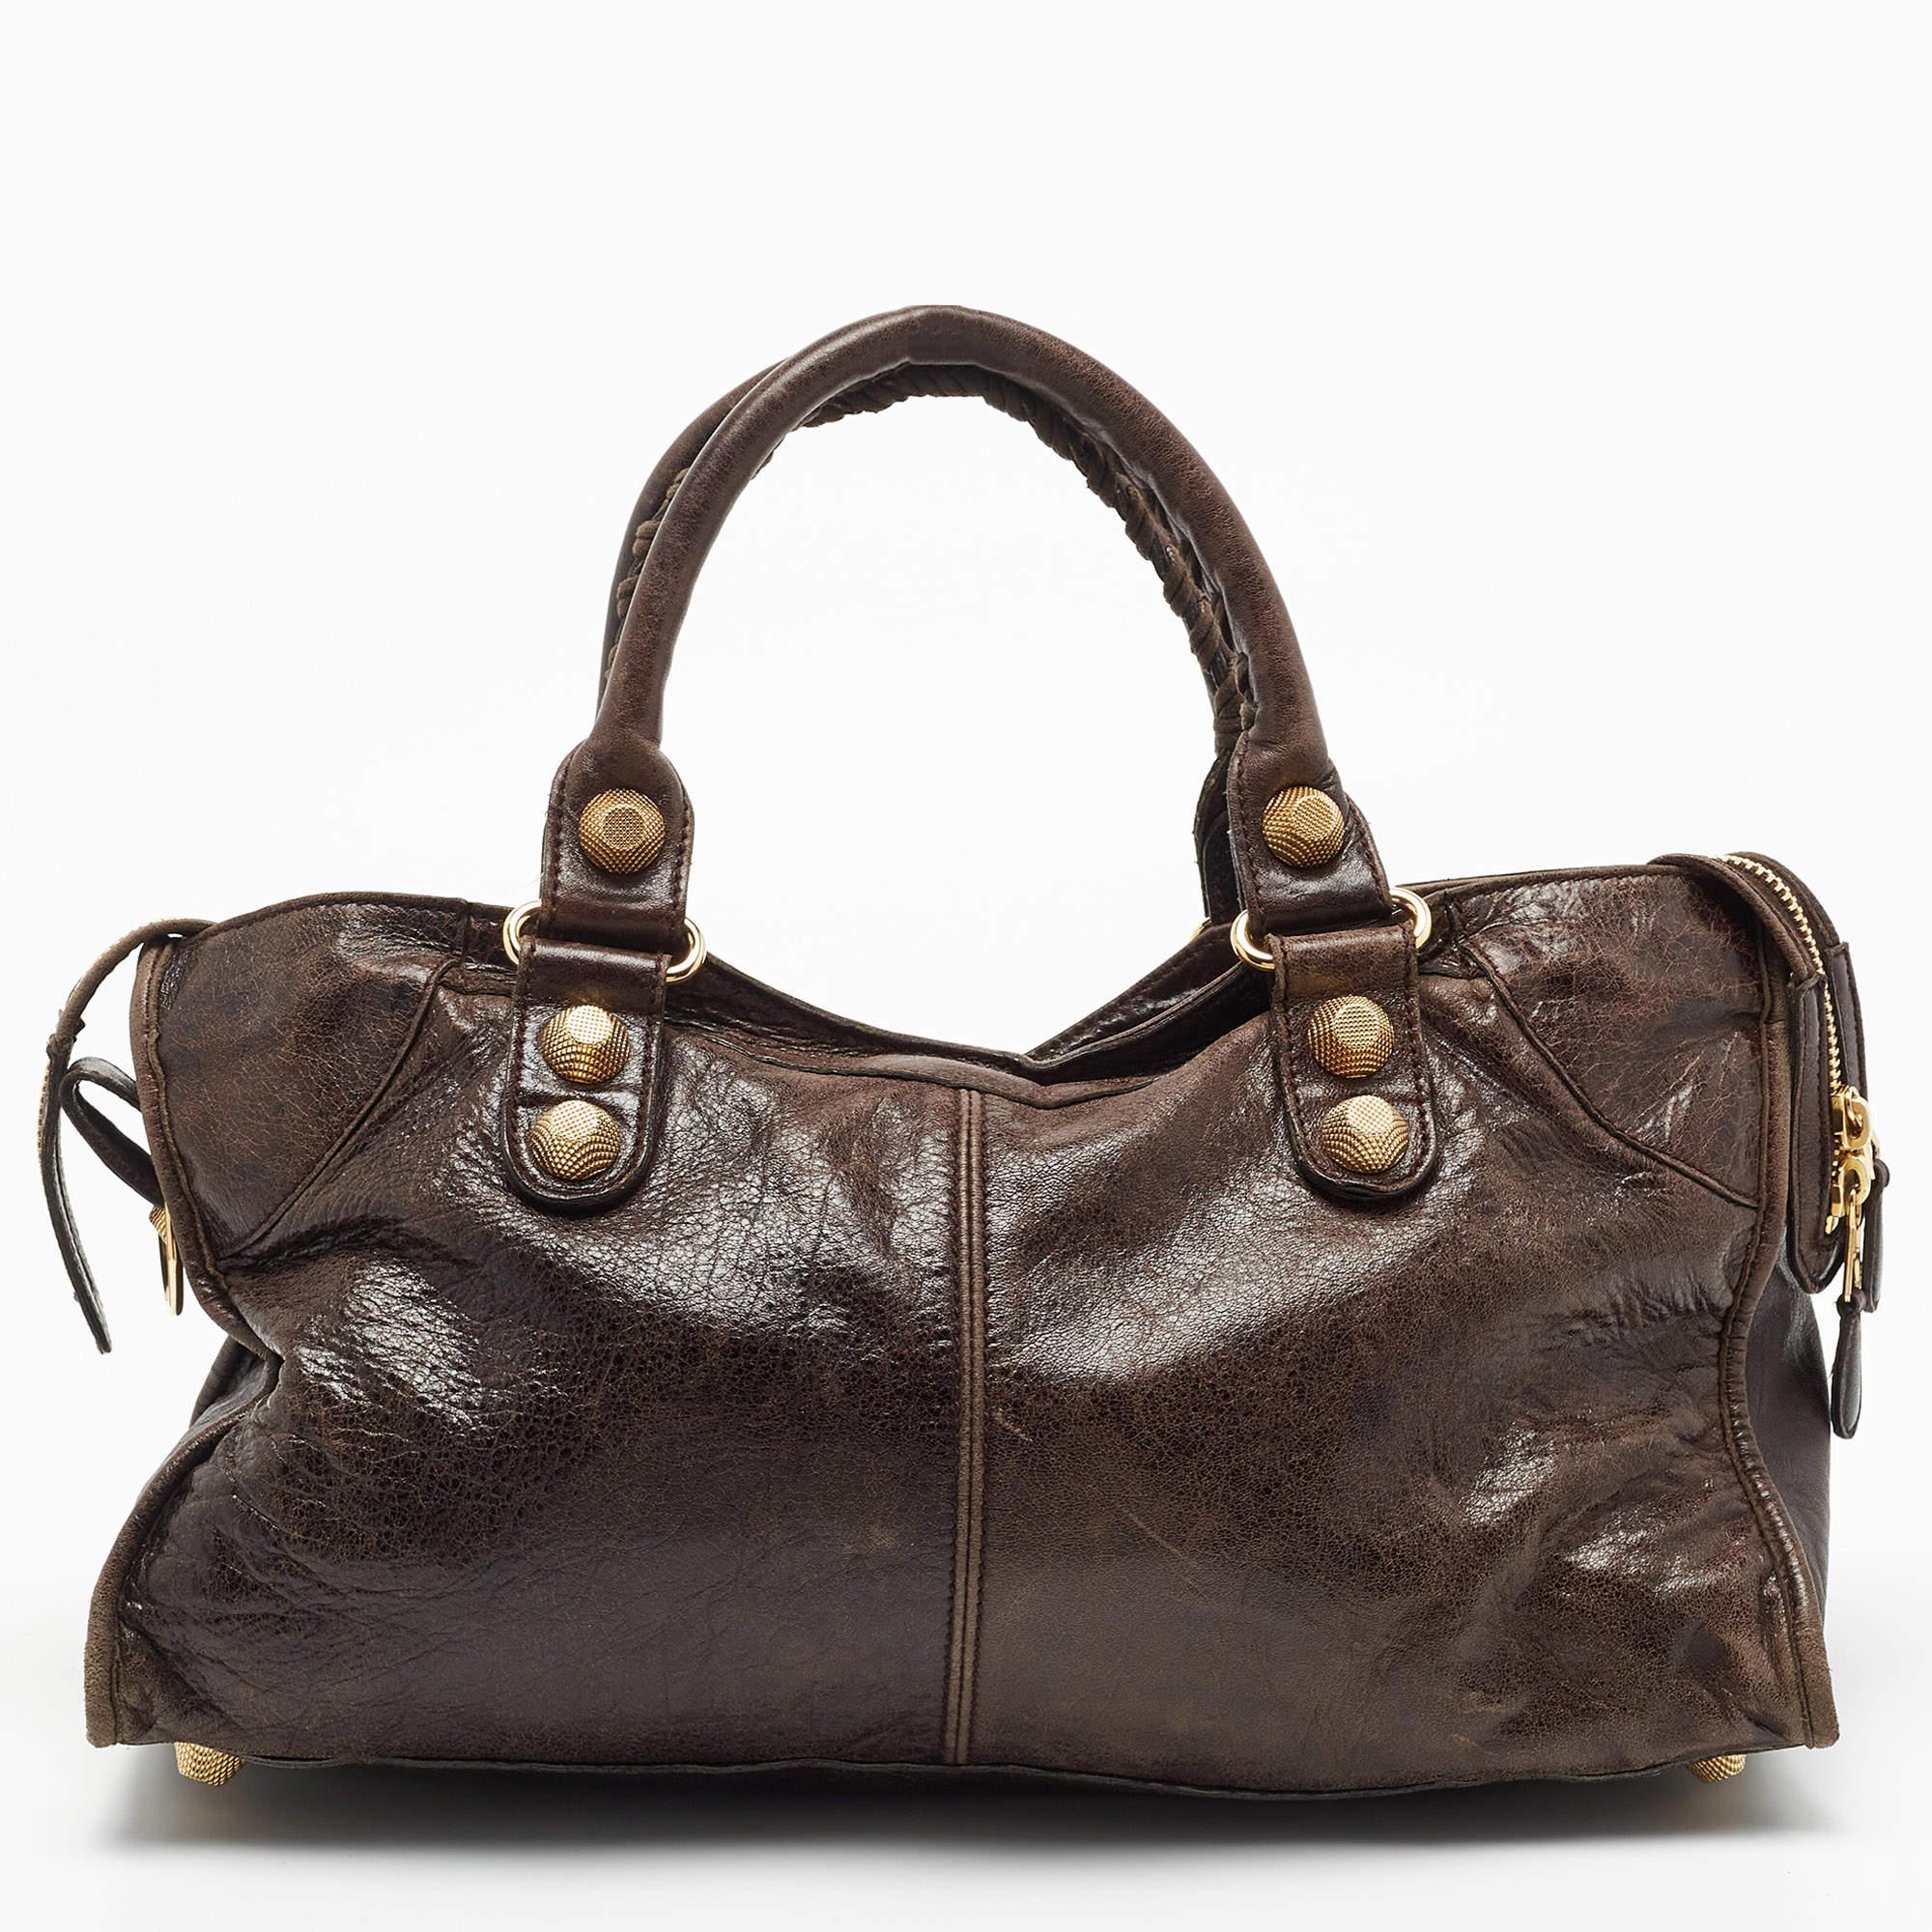 When in doubt, trust the classics. This Balenciaga GGH Part Time leather bag is offered in dark brown. The timeless silhouette is paired with gold-tone hardware and fitted with two top handles and a shoulder strap. Make a worthy investment with this